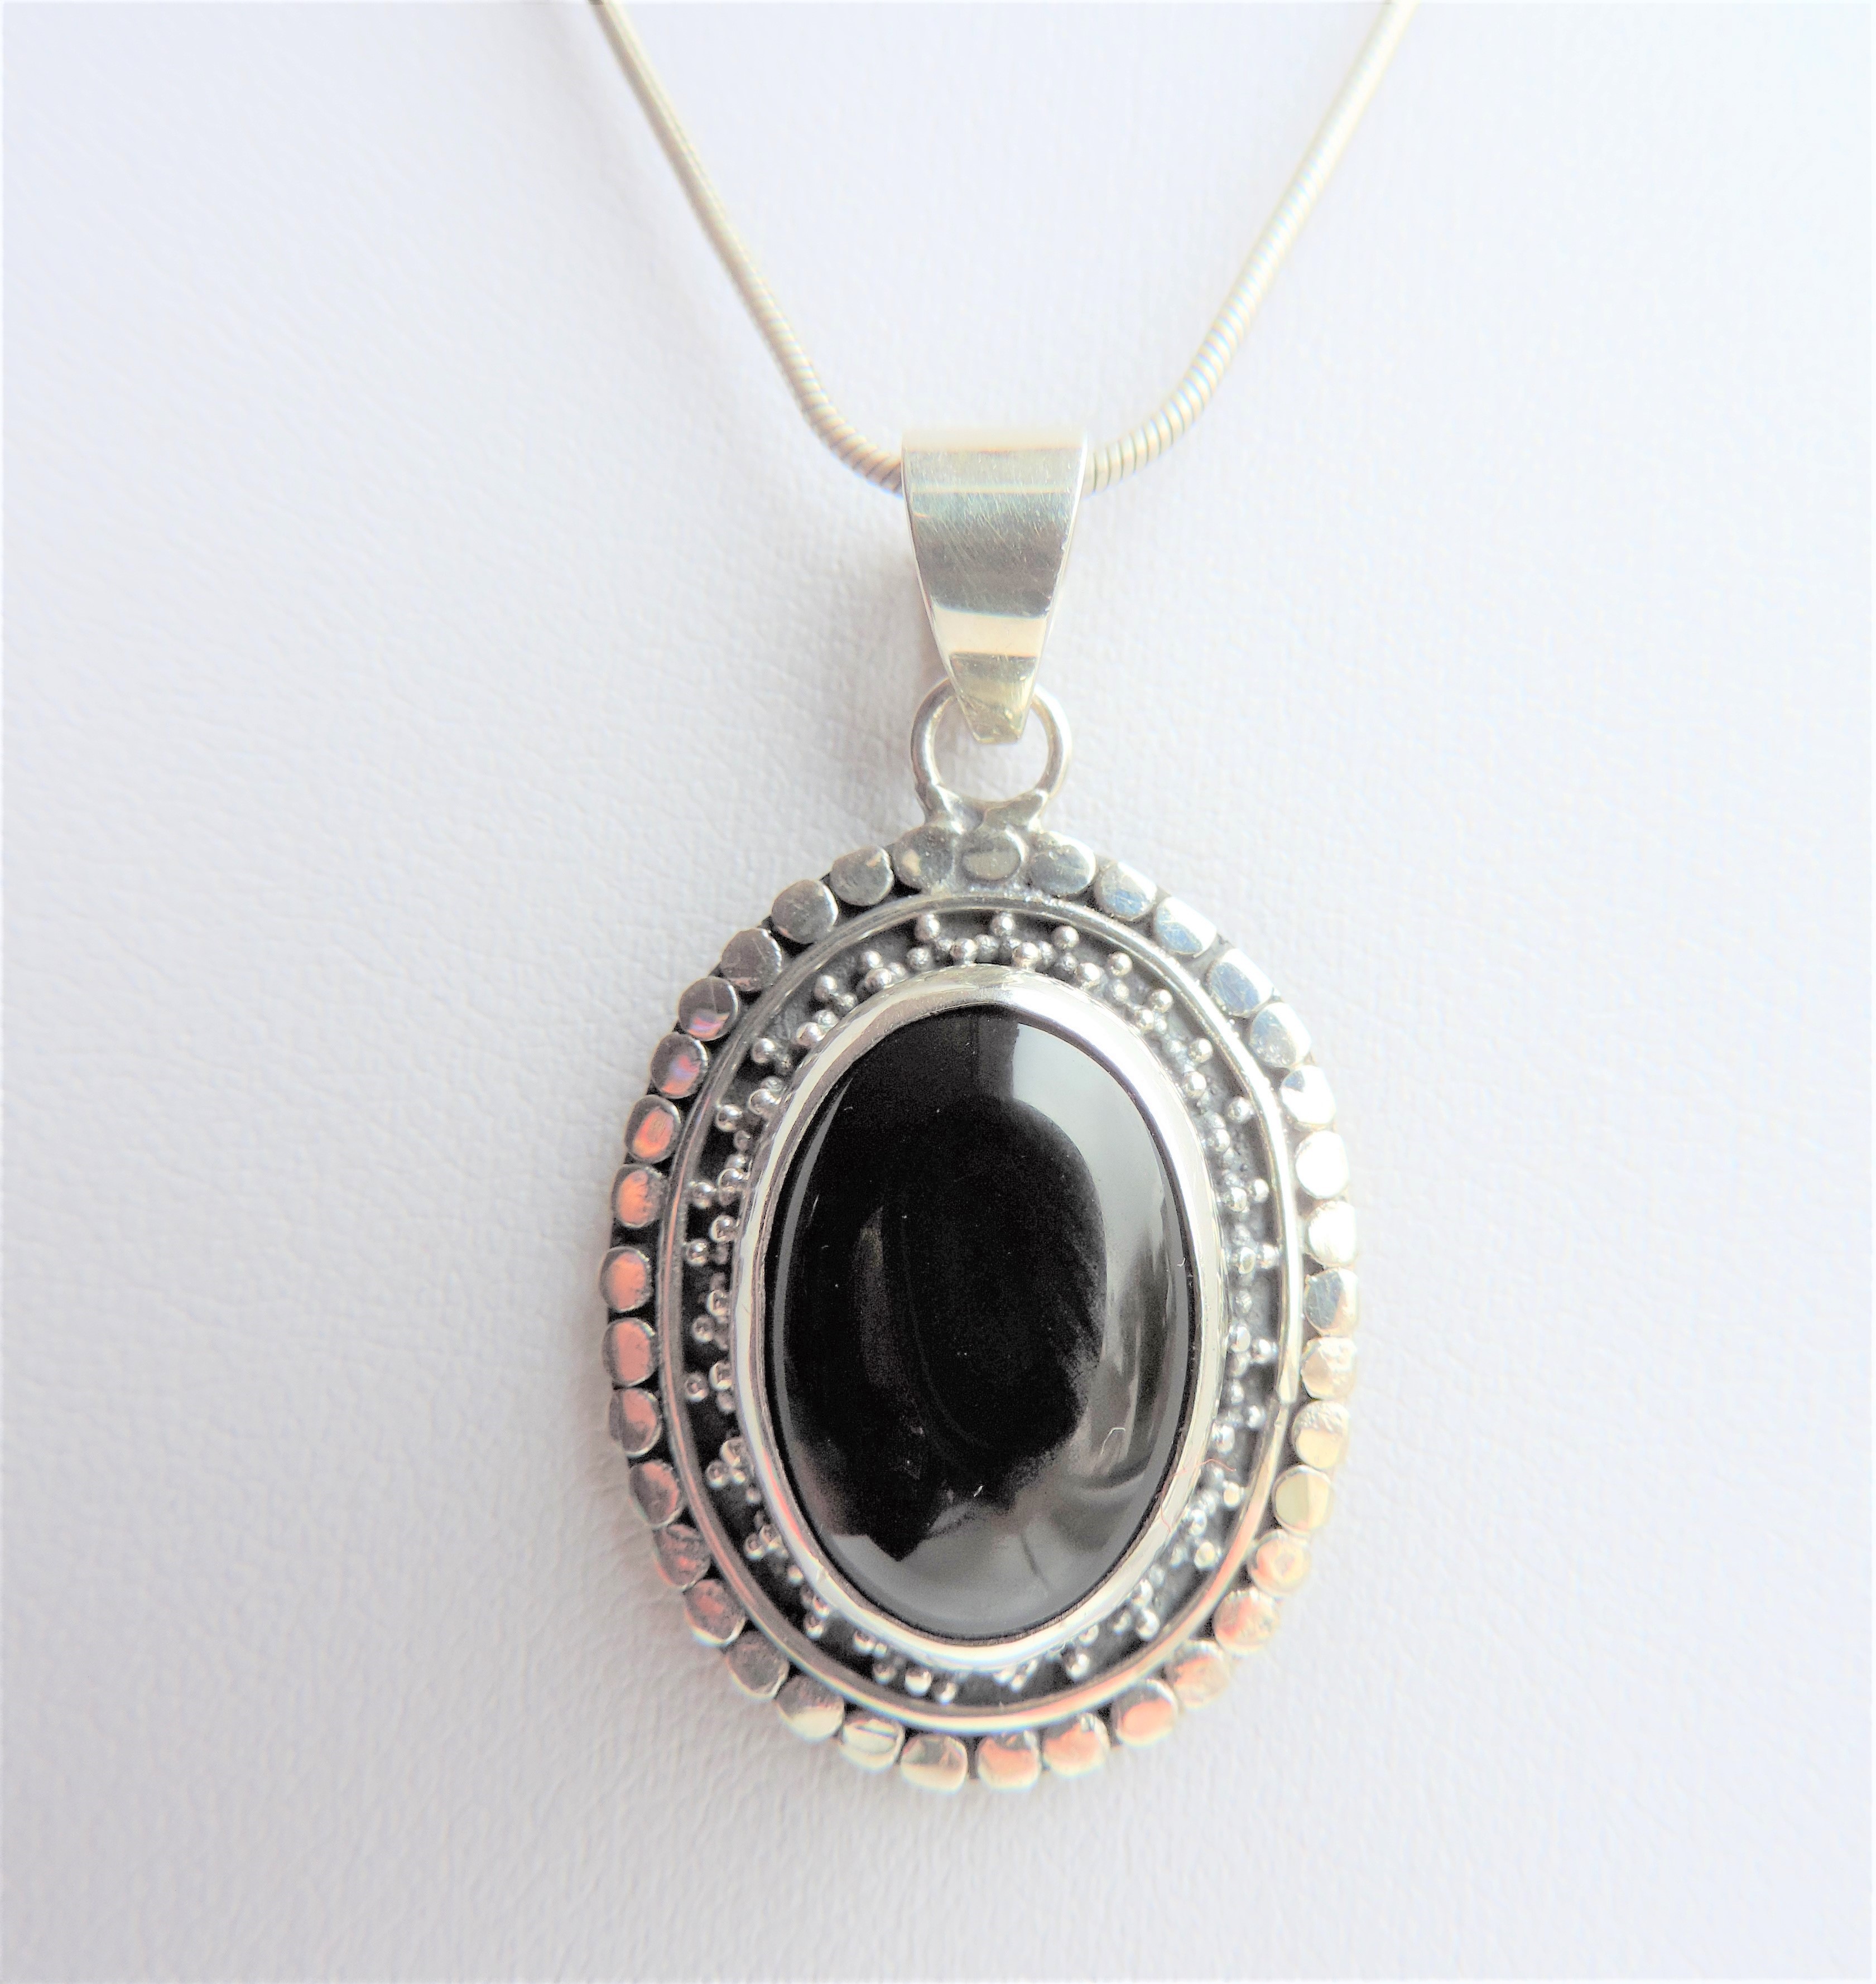 925 Sterling Silver Black Onyx Pendant Necklace - Image 2 of 3